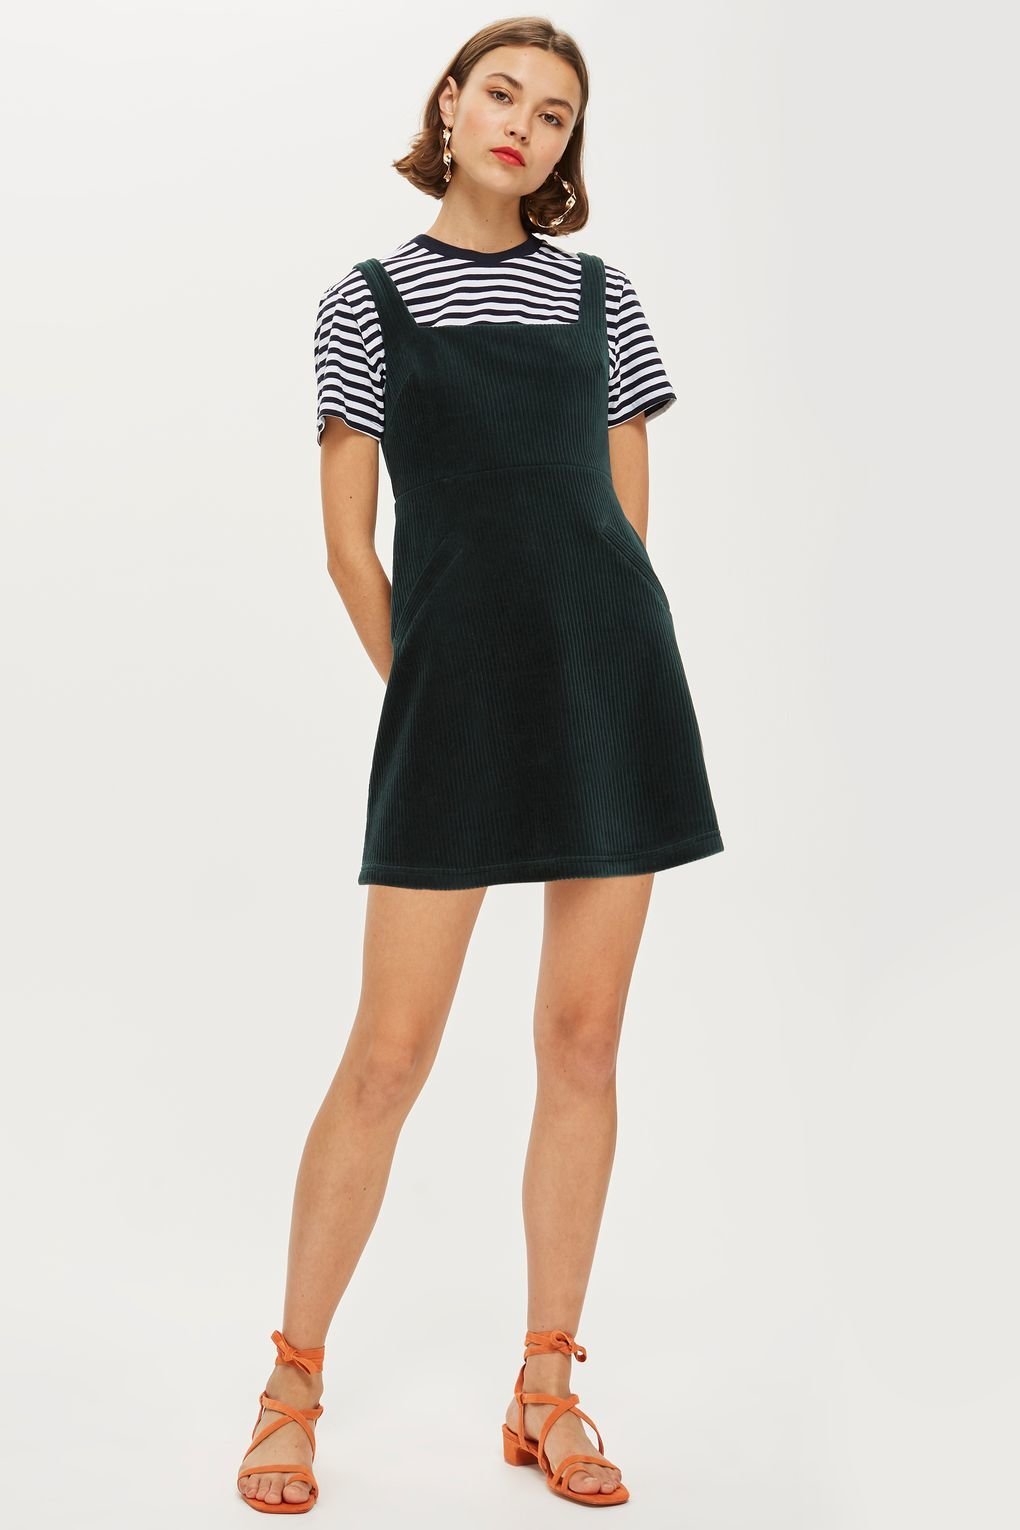 tops to go under pinafore dress